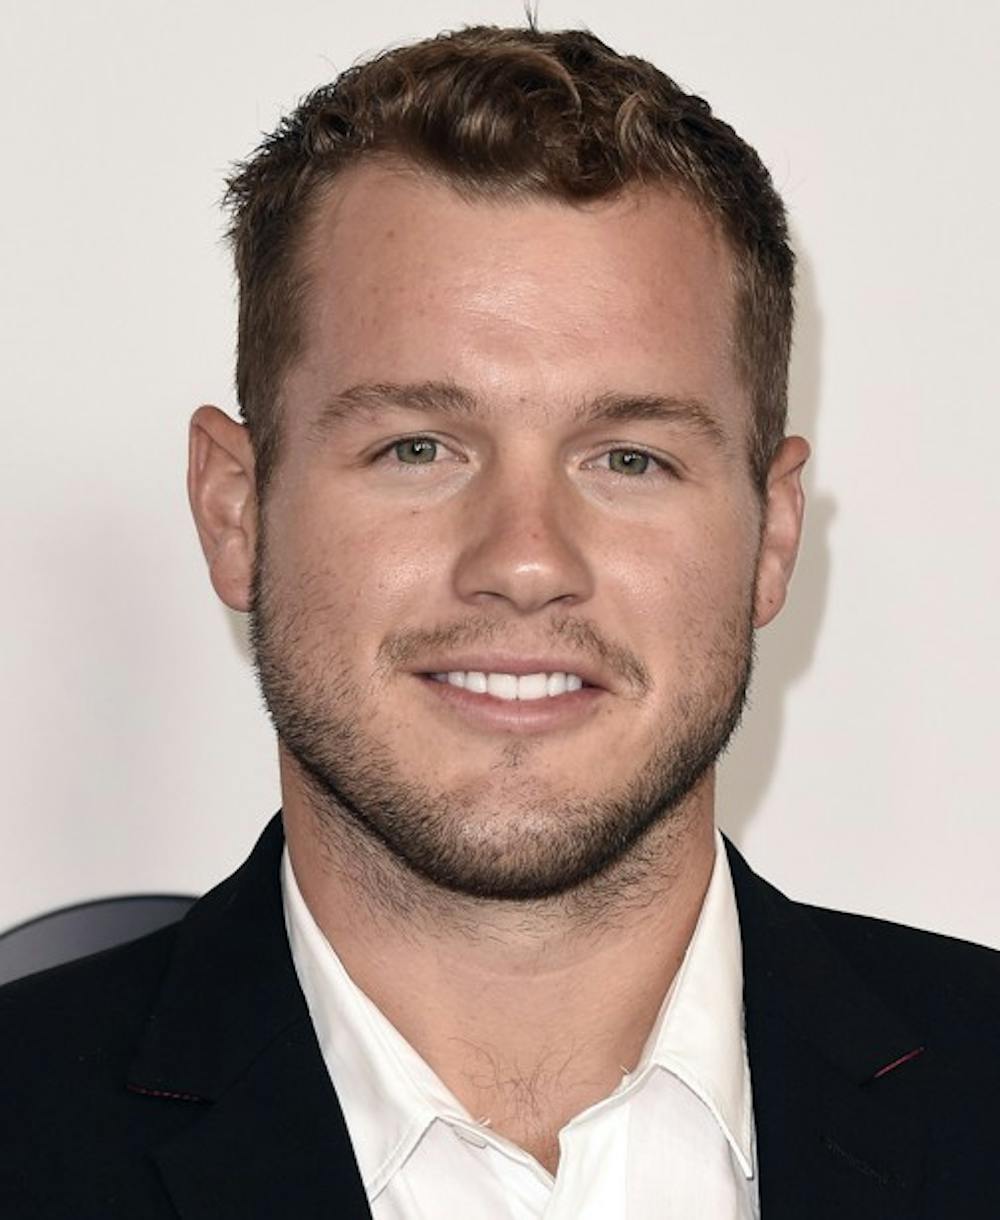 Colton Underwood at the Disney ABC 2018 Summer Press Tour at the Beverly Hilton on August 7, 2018 in Beverly Hills, California. (Scott Kirkland/PictureGroup/Sipa USA/TNS)